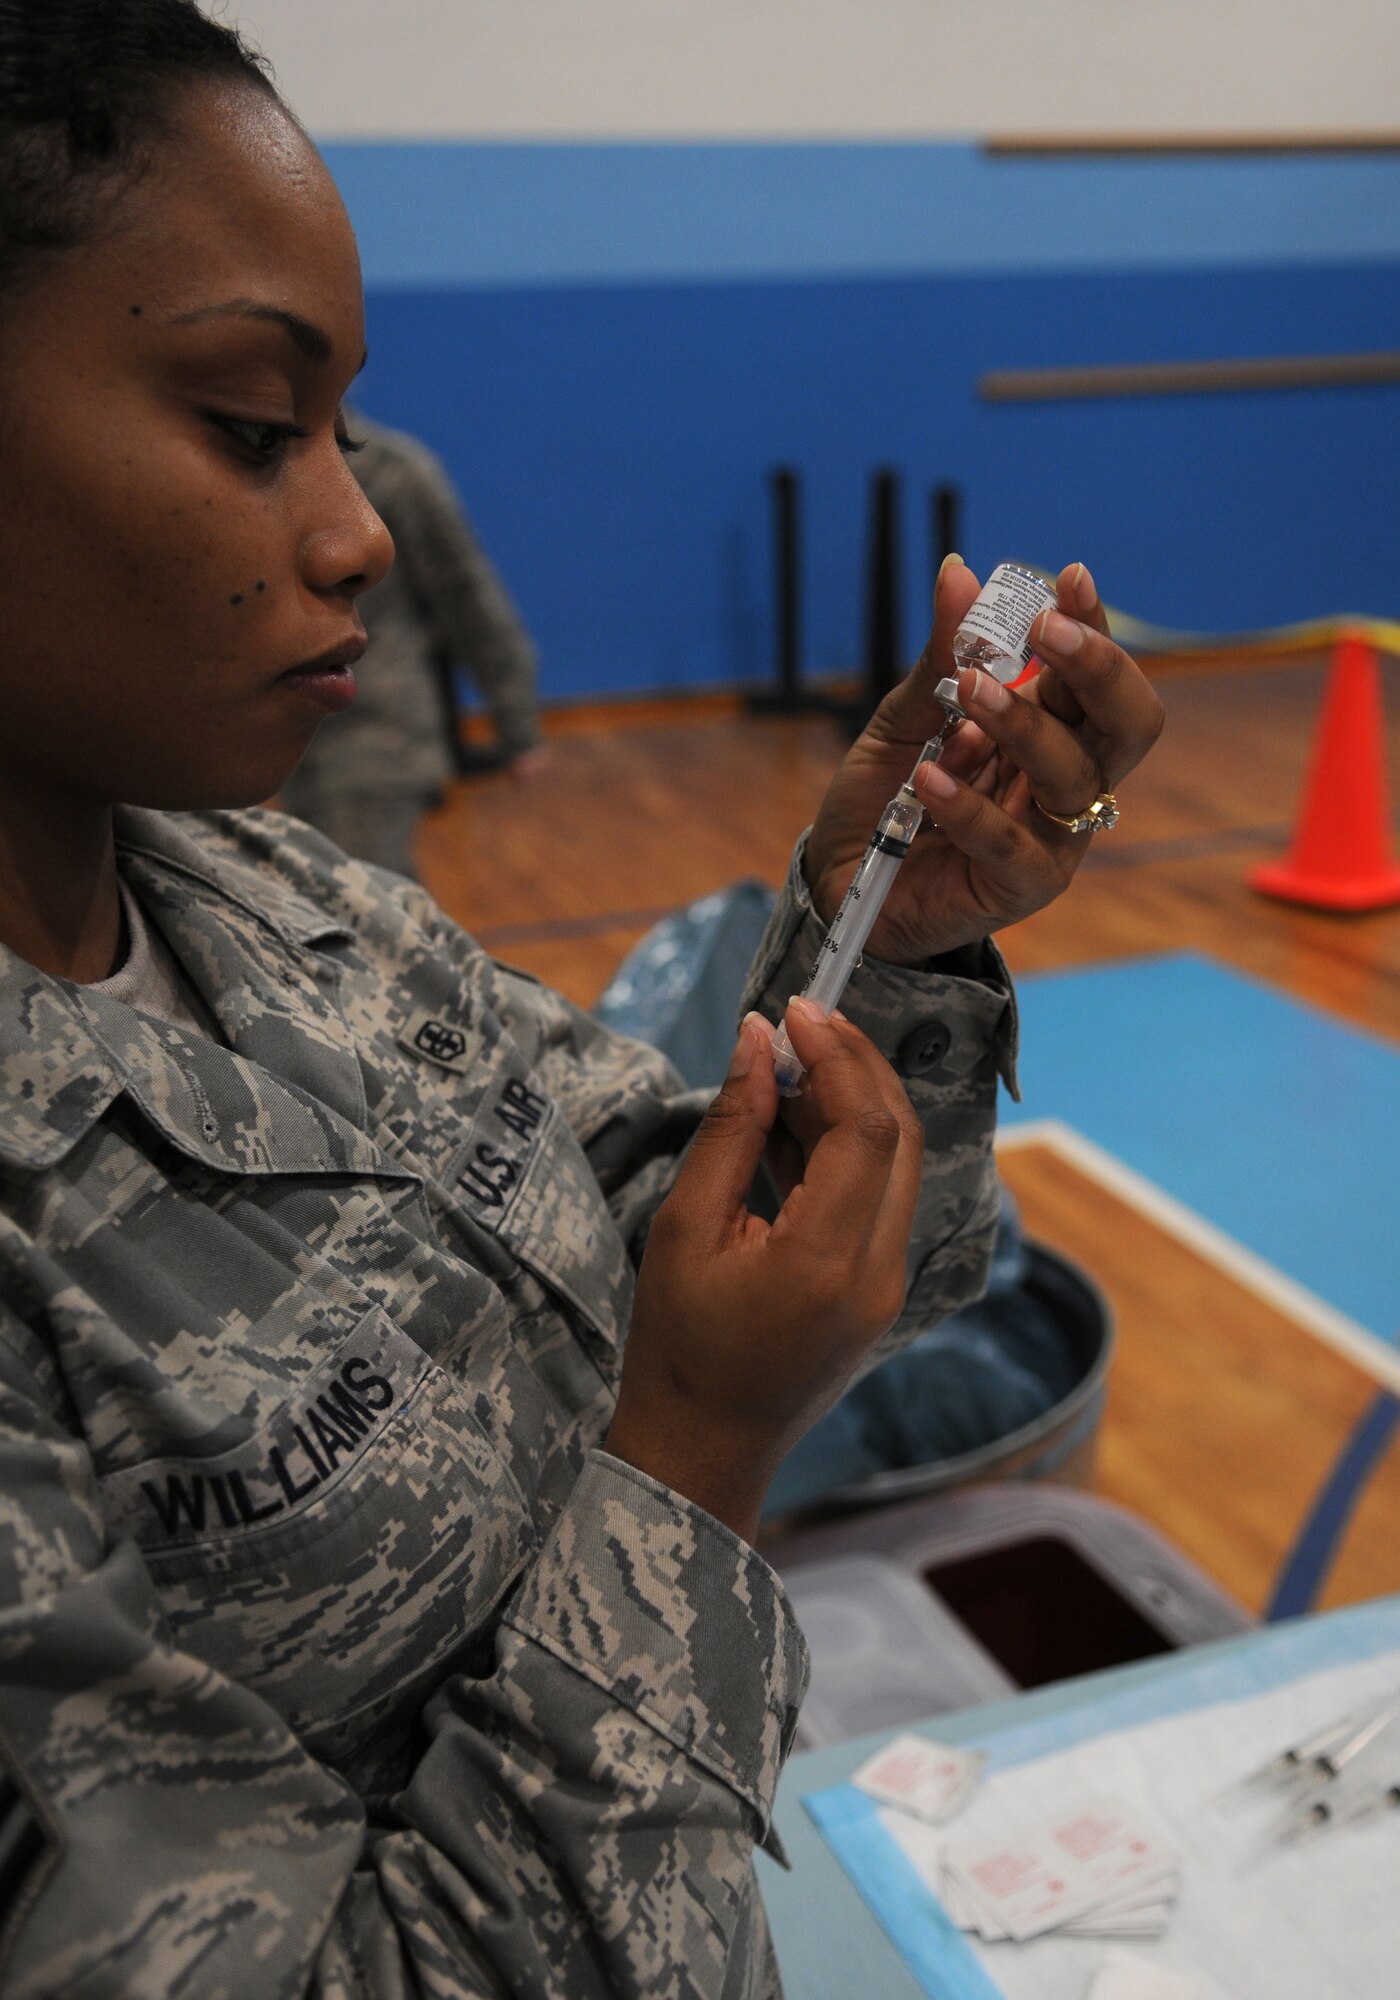 U.S. Air Force Senior Airman Sara Williams, 86th Aeromedical Squadron medical technician, prepares the H1N1 vaccine for administration at the Southside Gym Annex Ramstein Air Base, Germany, Nov. 17, 2009. The H1N1 vaccine is being given to military members and their families to help fight against influenza around the Kaiserslautern Military Community. (U.S. Air Force photo by Airman 1st Class Caleb Pierce)